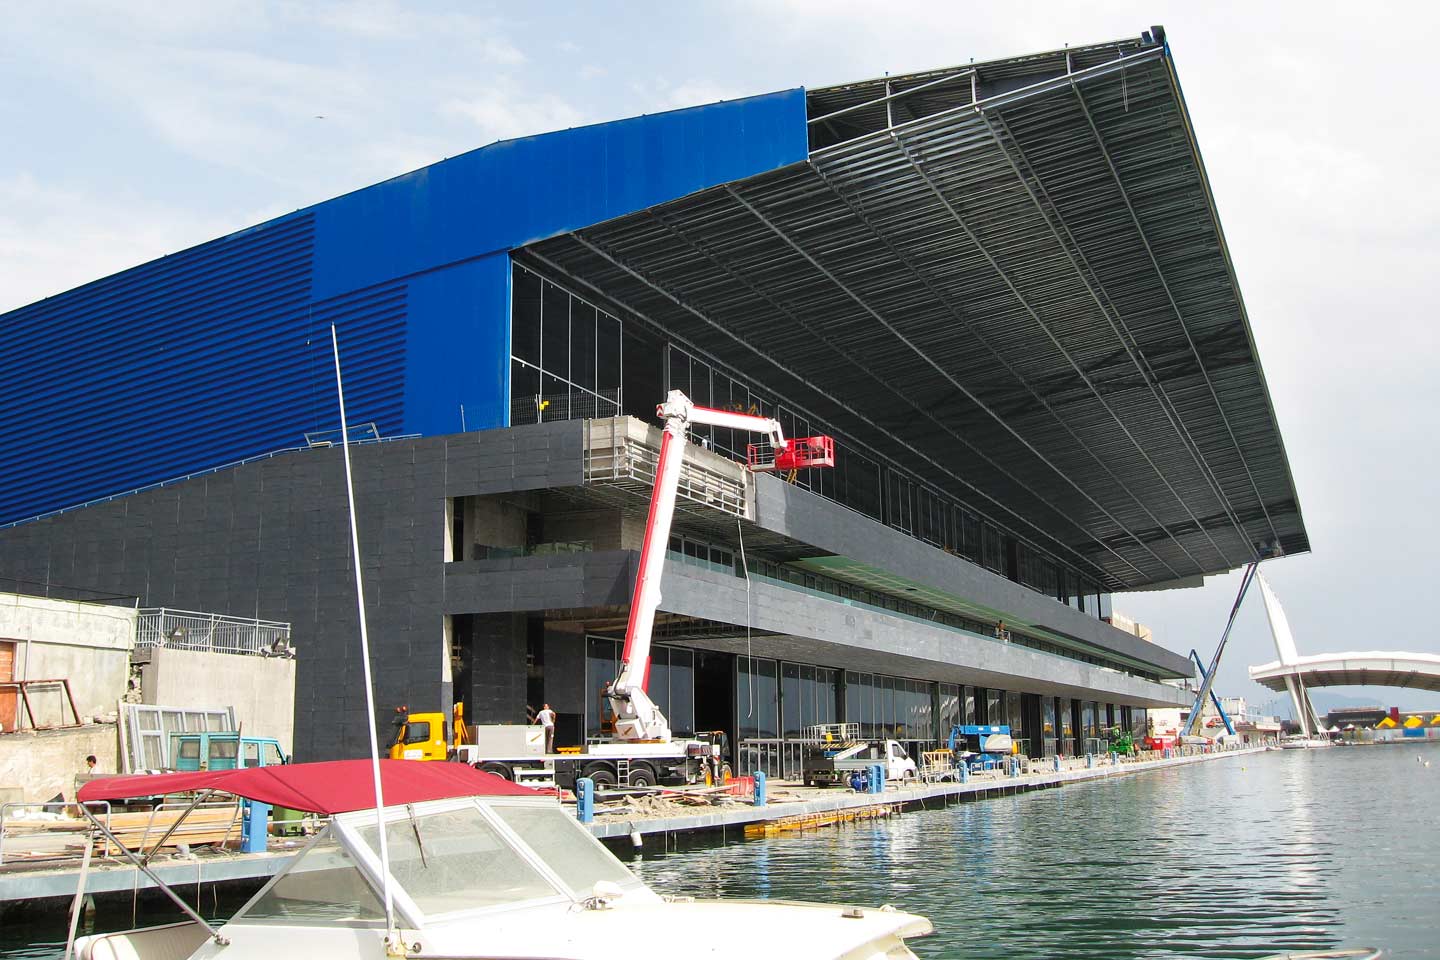 Pavilion B for the Expo of Genoa